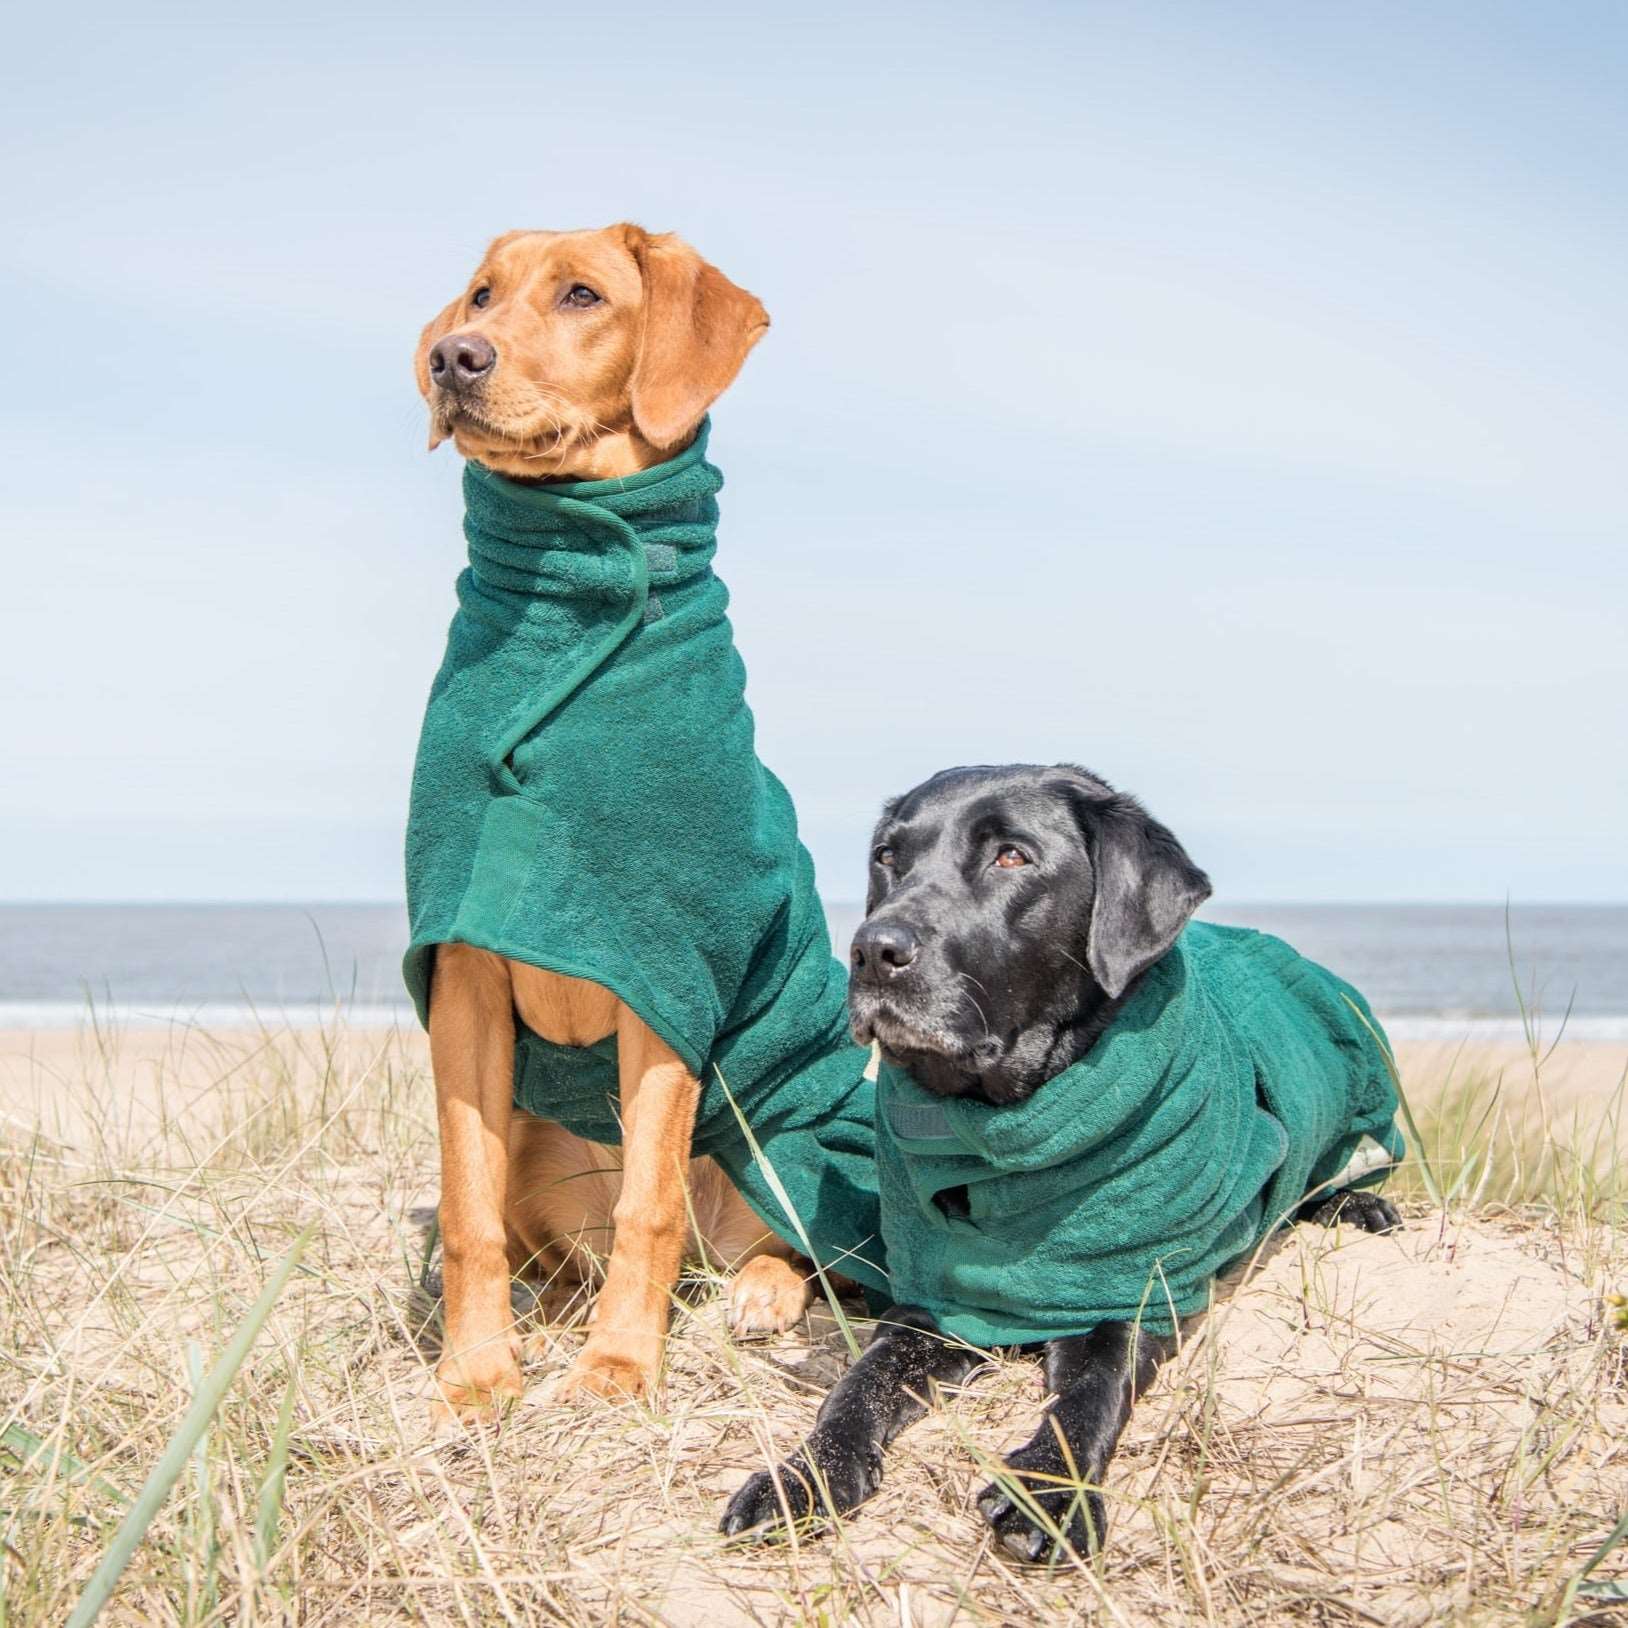 two Labrador dogs wearing ruff and tumblr towel drying coats on the beach